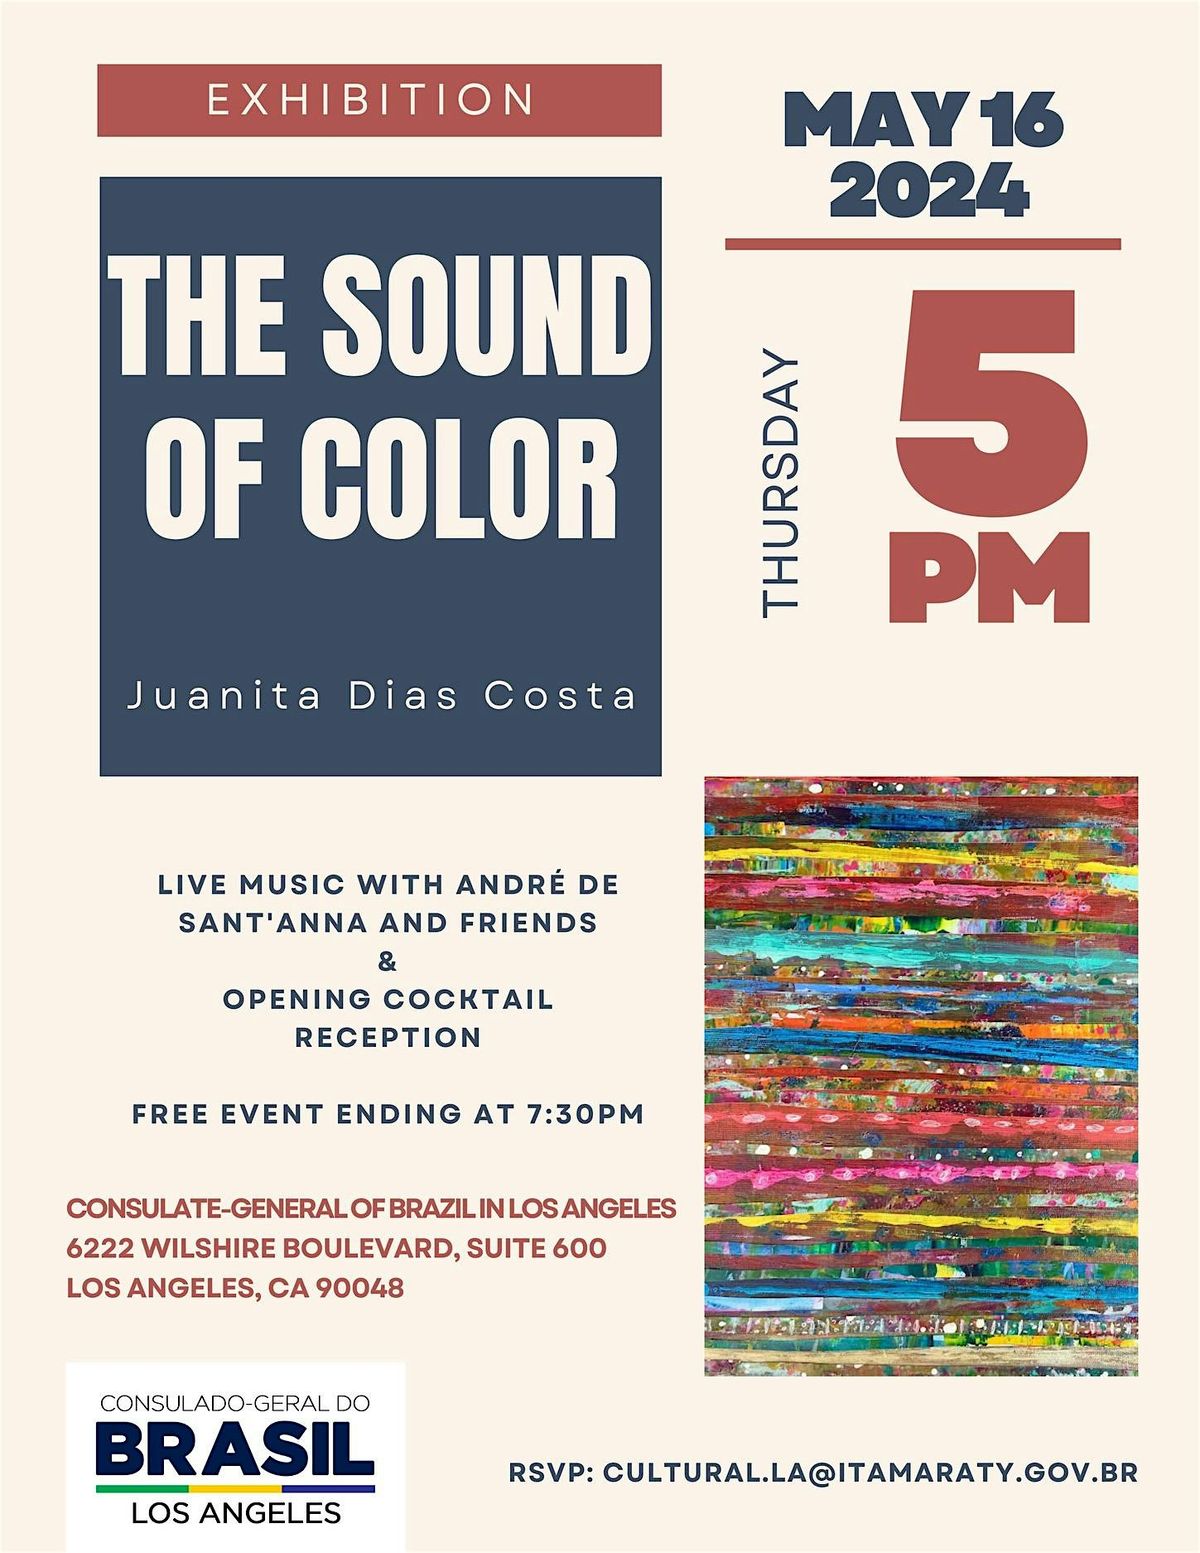 The Sound Of Color Art Exhibit and Live Music